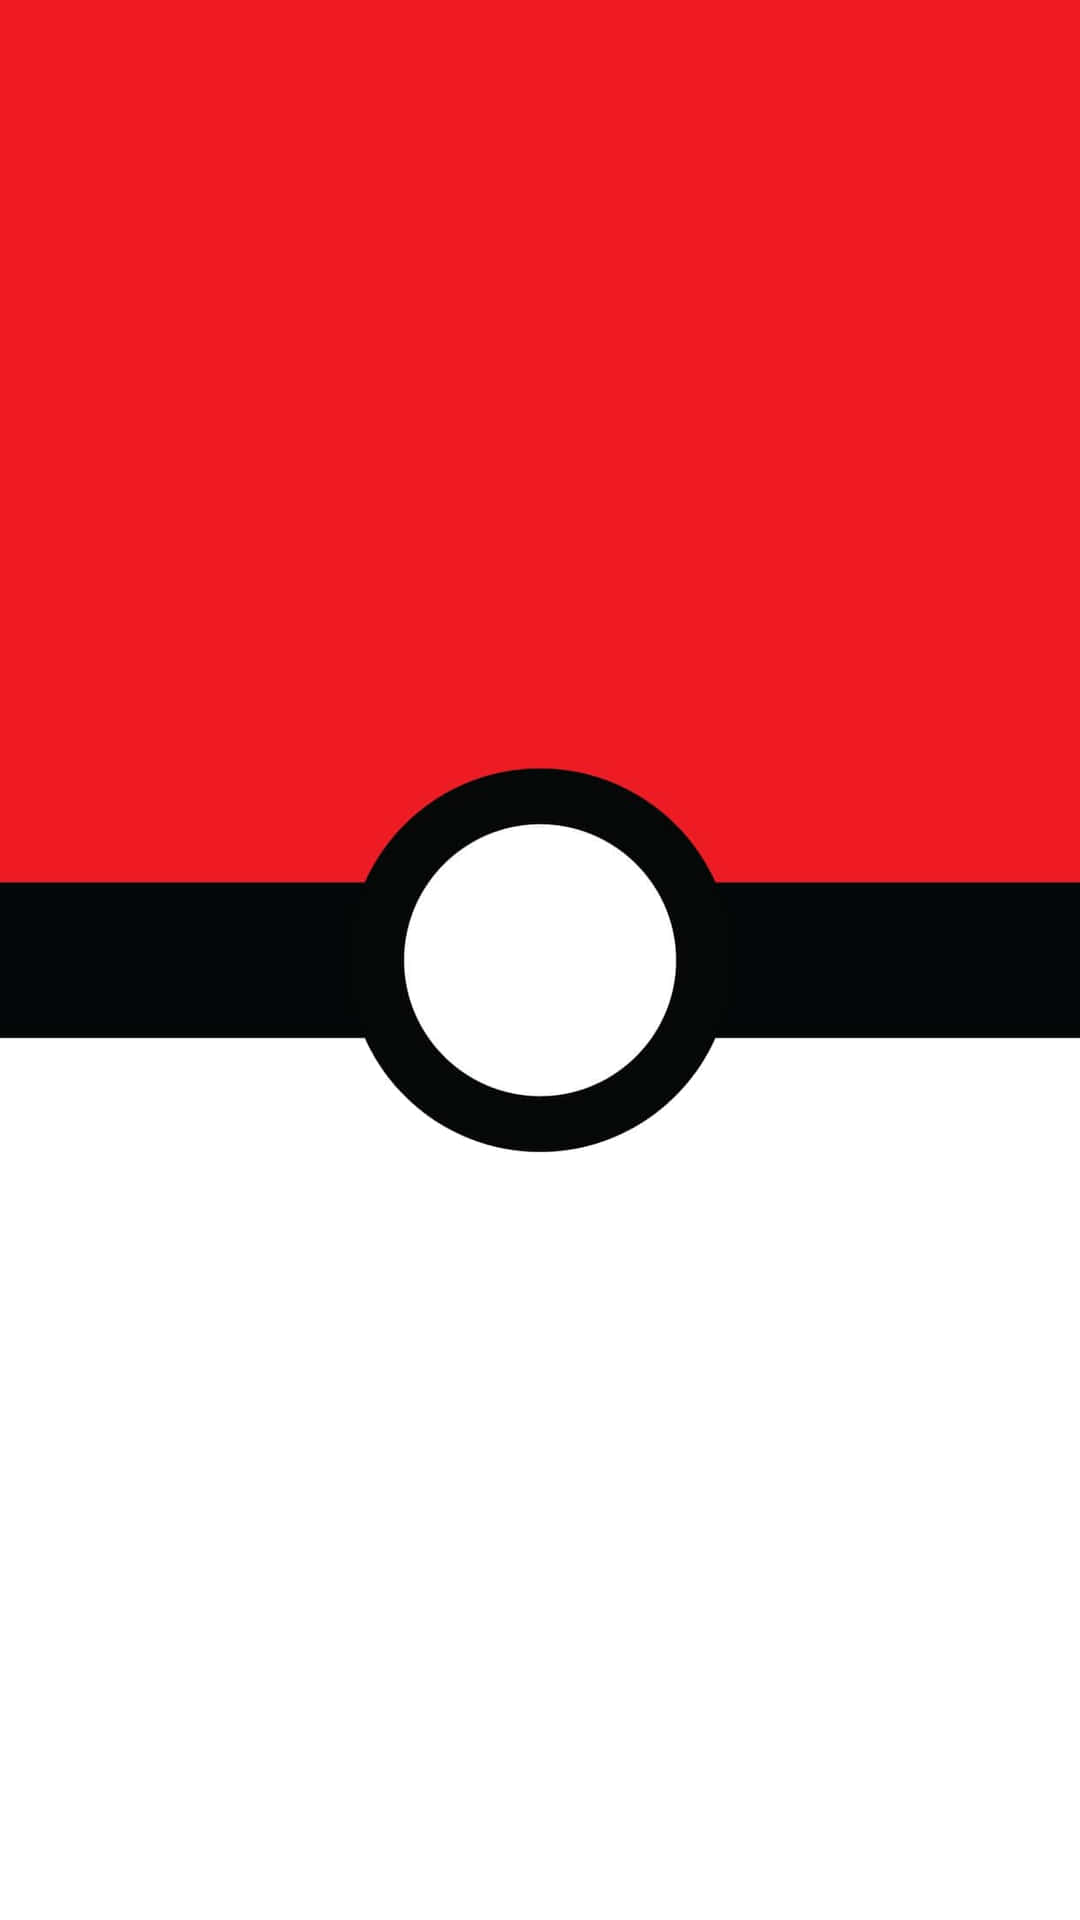 Experience the Power of Pokemon with this Minimalist Image Wallpaper